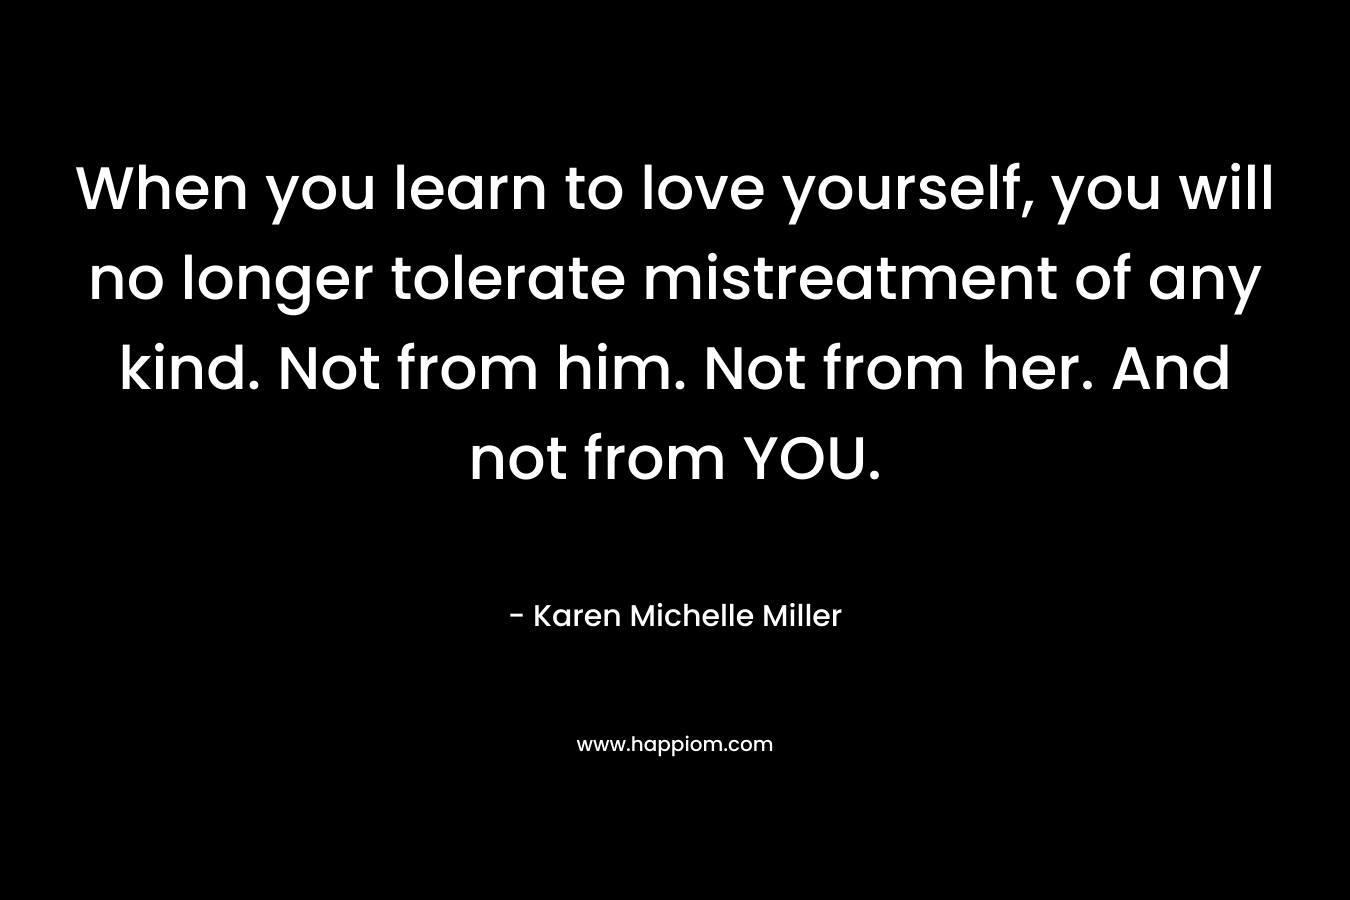 When you learn to love yourself, you will no longer tolerate mistreatment of any kind. Not from him. Not from her. And not from YOU.